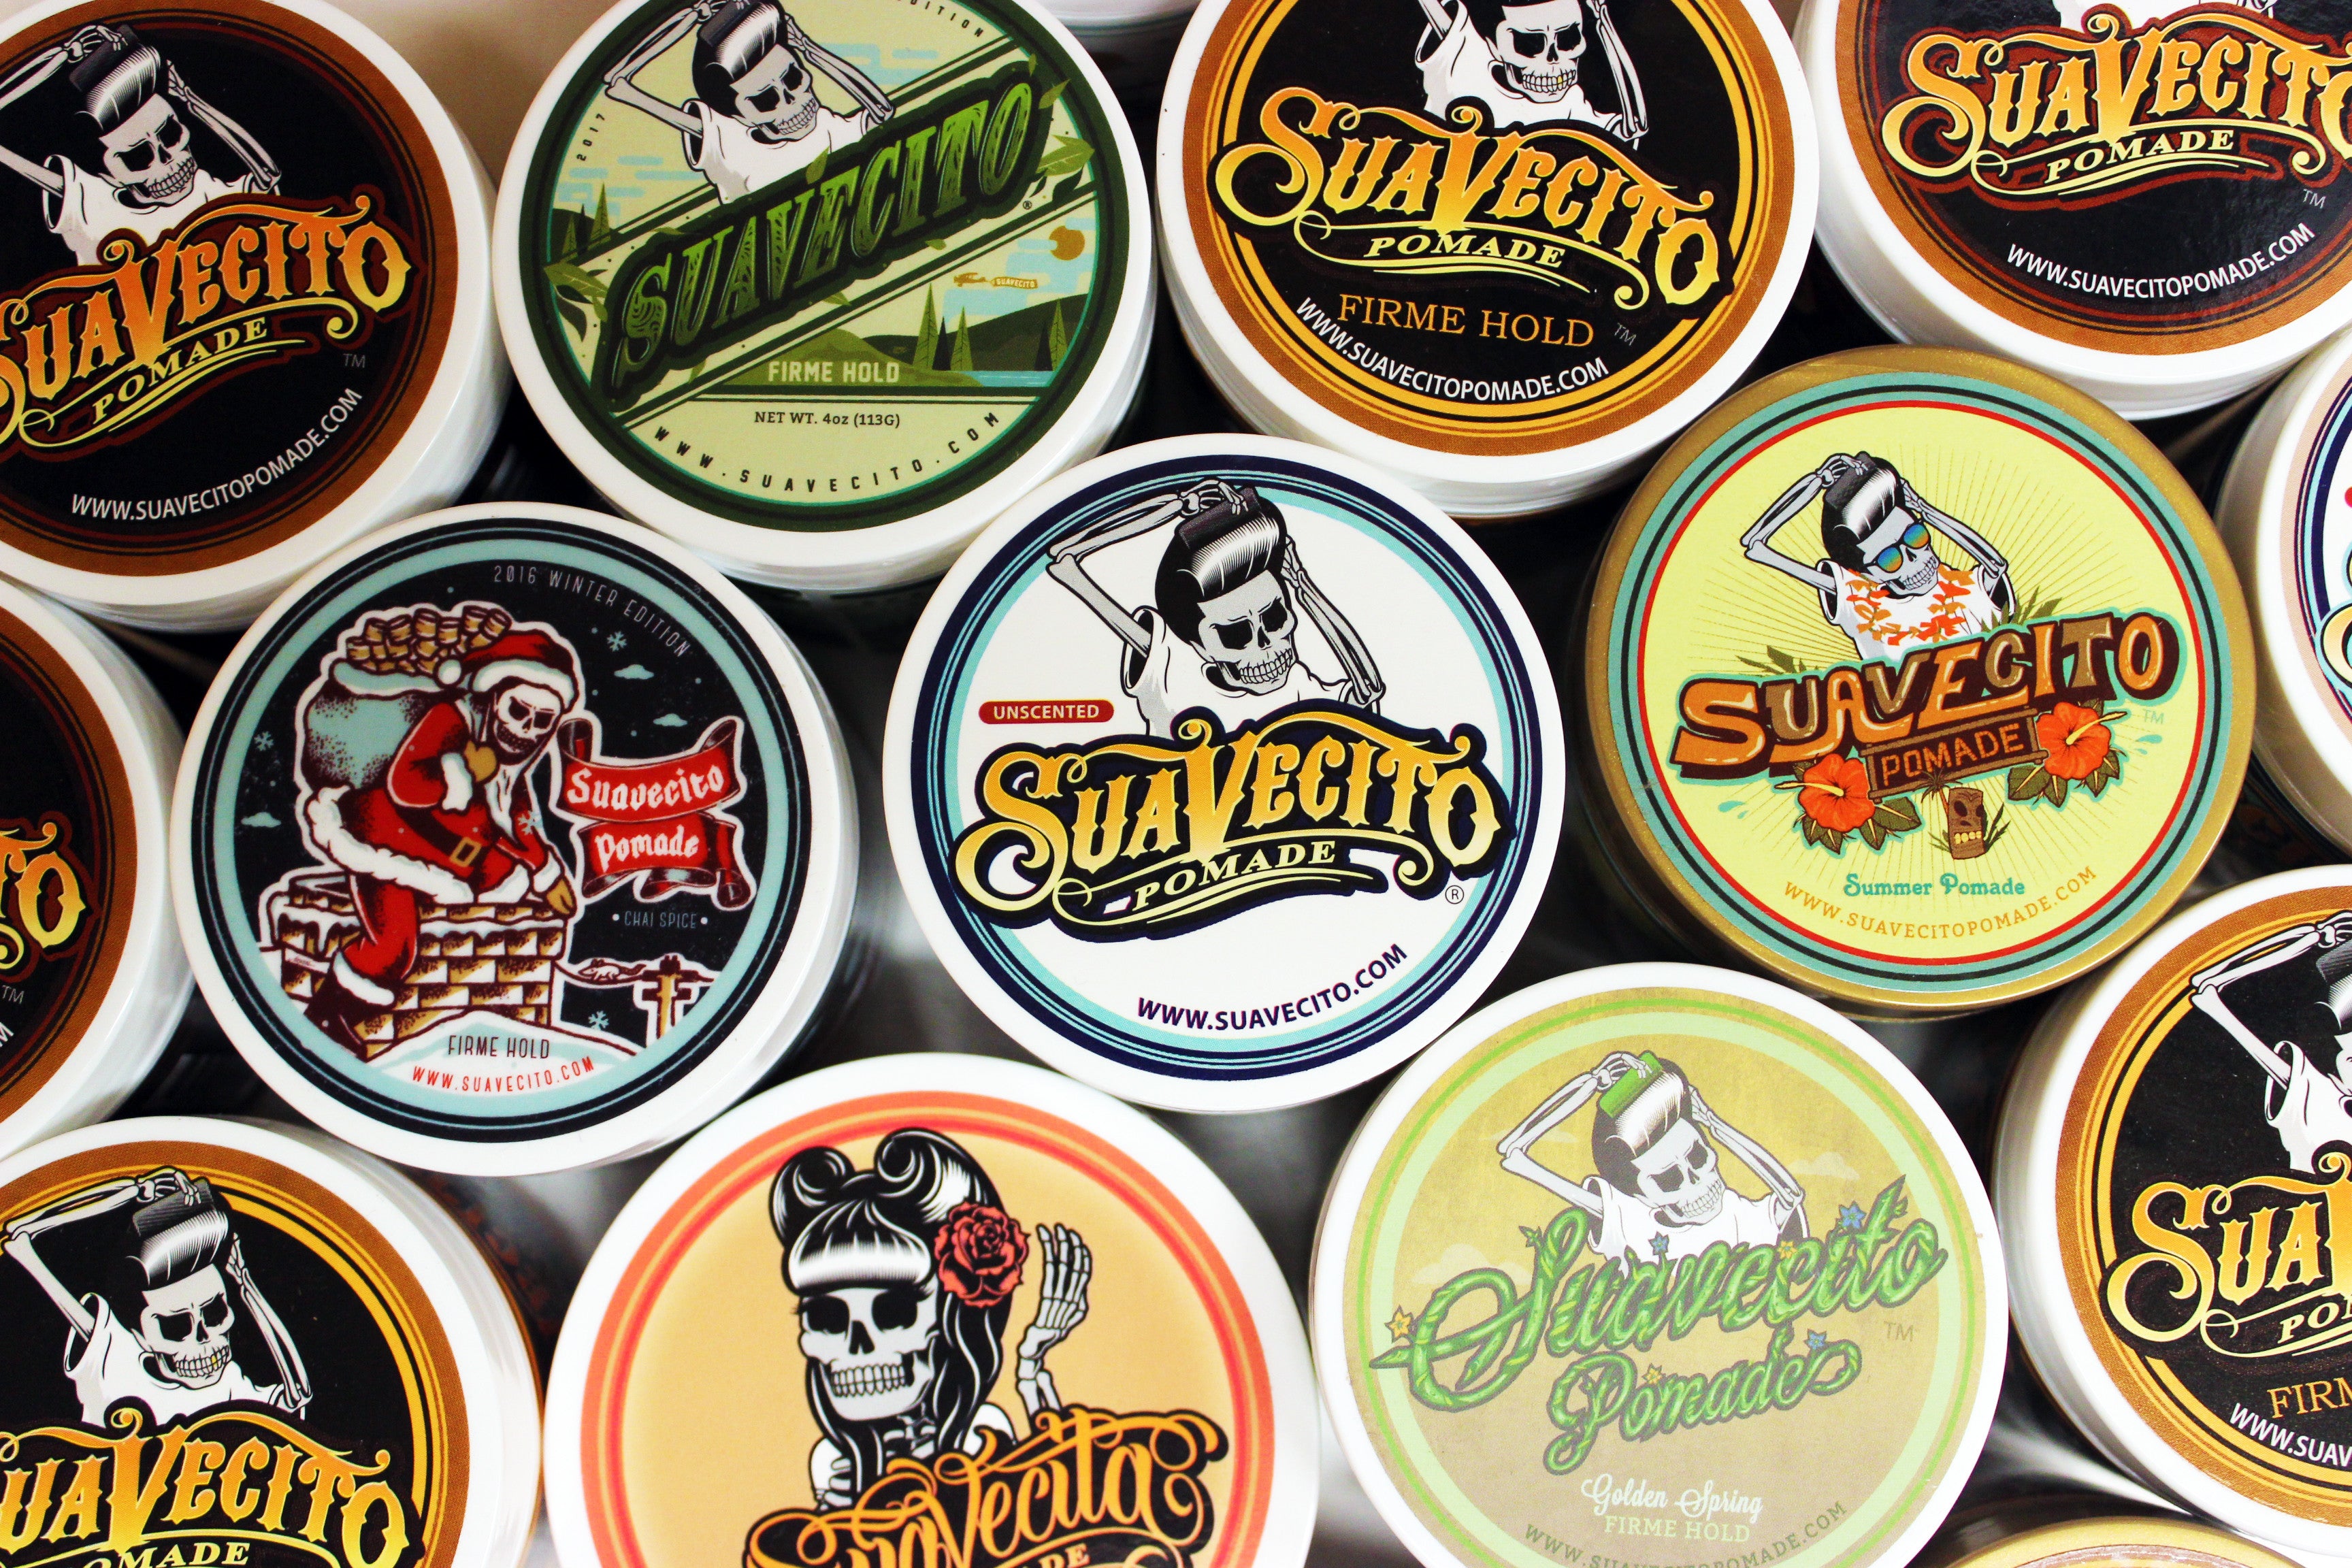 Various edition cans of suavecito pomade